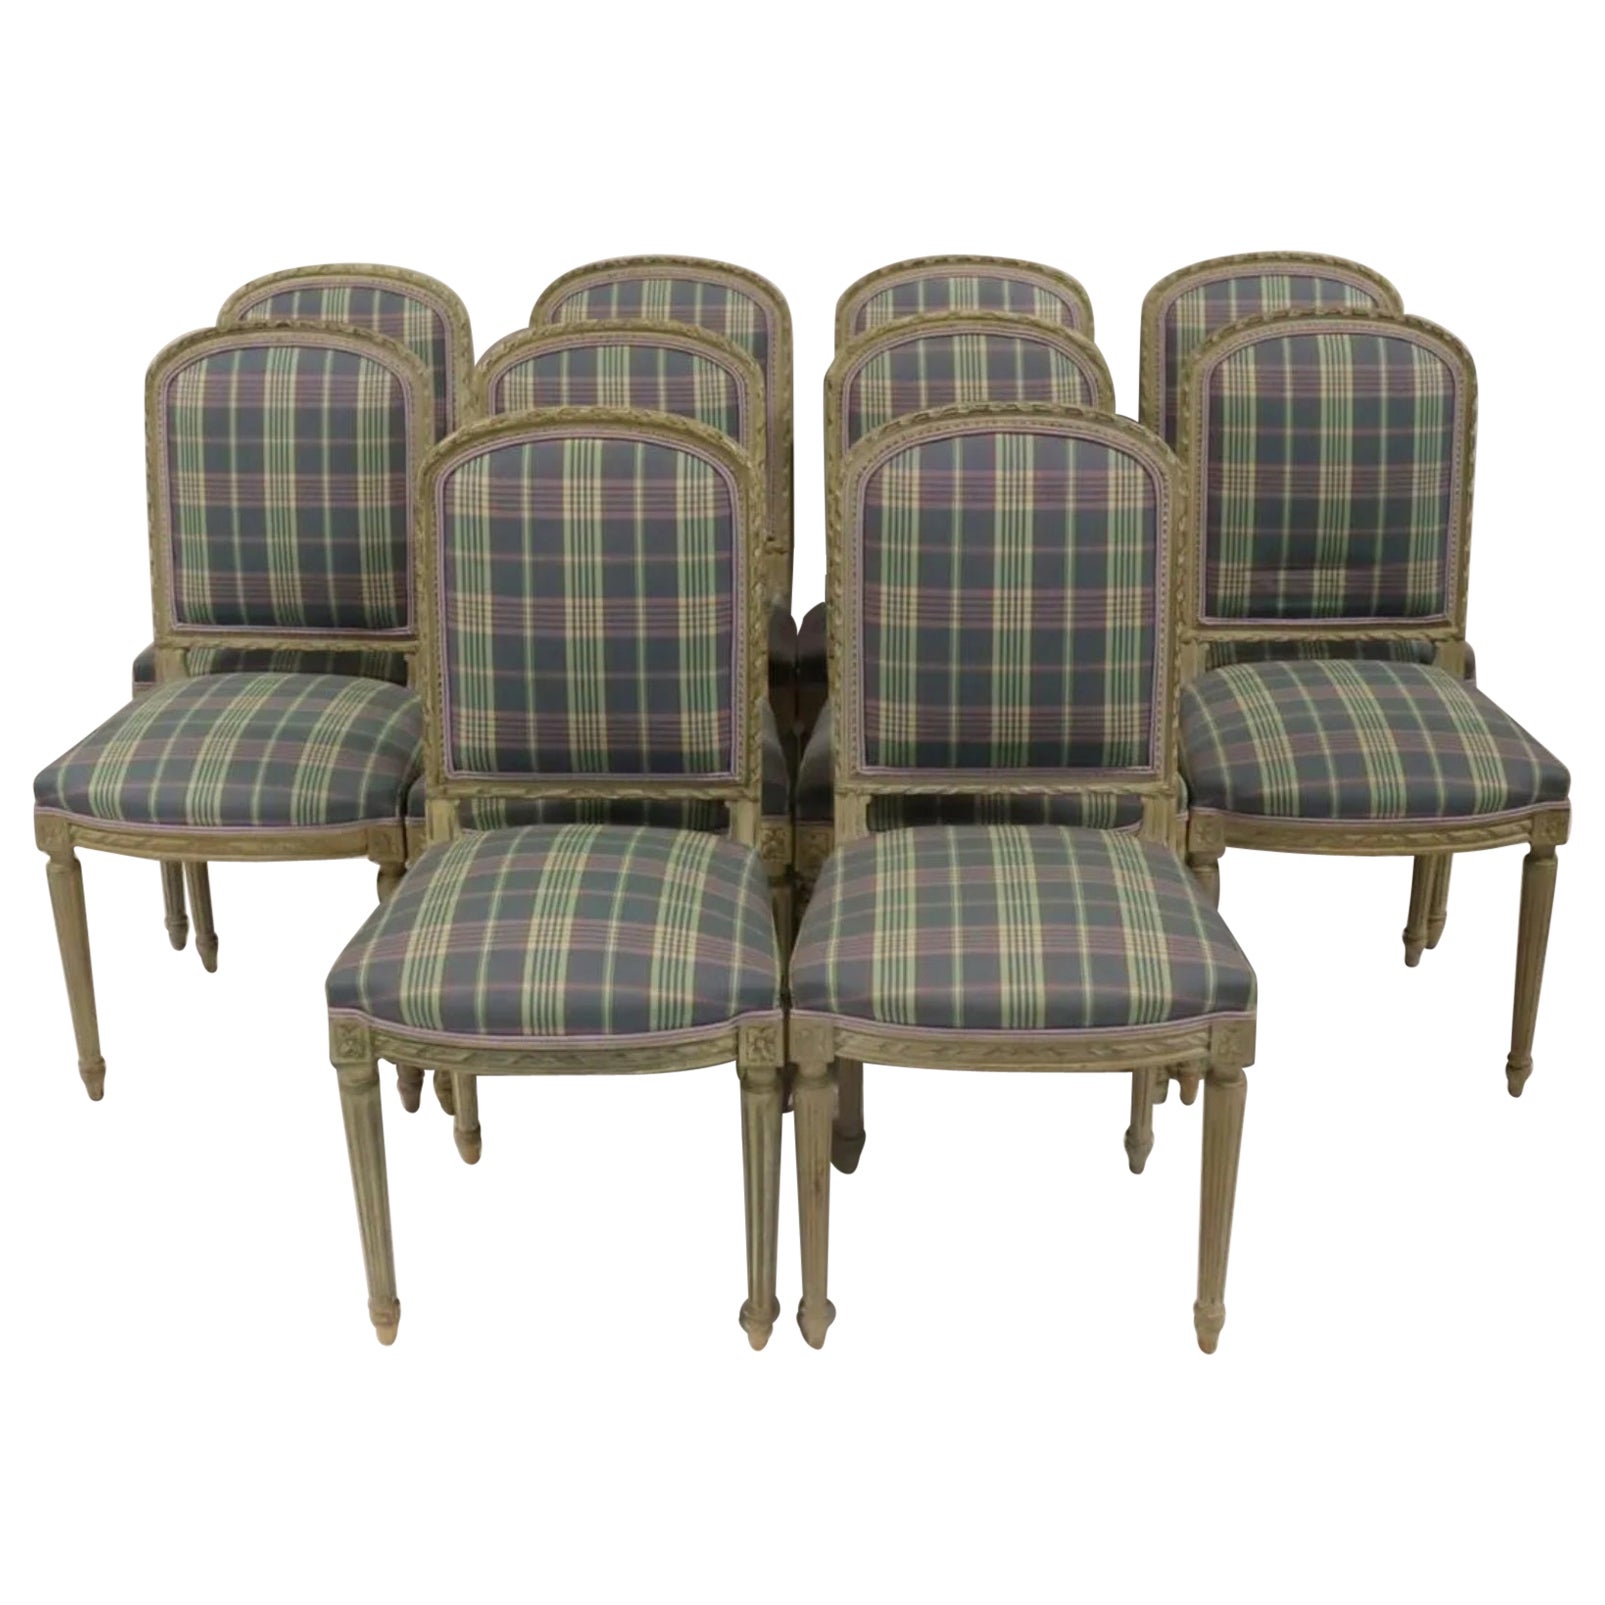 Set of Ten Plaid and Painted Louis XVI Style Dining Chairs, circa 1930